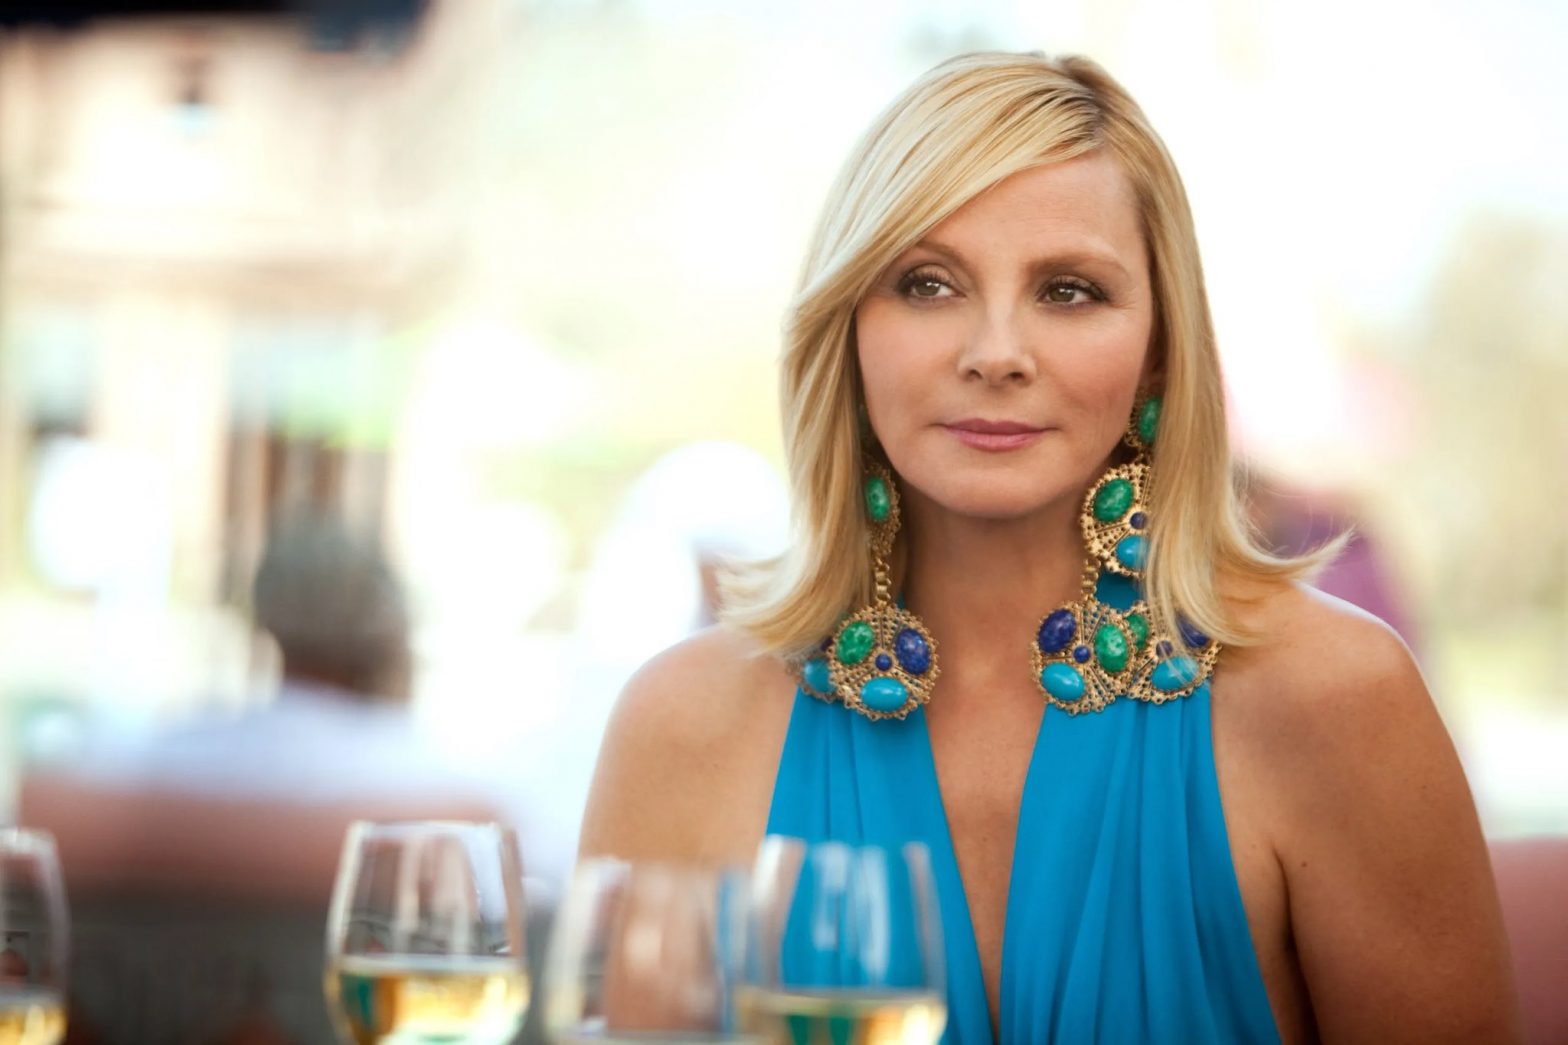 Is Kim Cattral returning as Sex and the City’s Samantha Jones in ‘And Just Like That’?